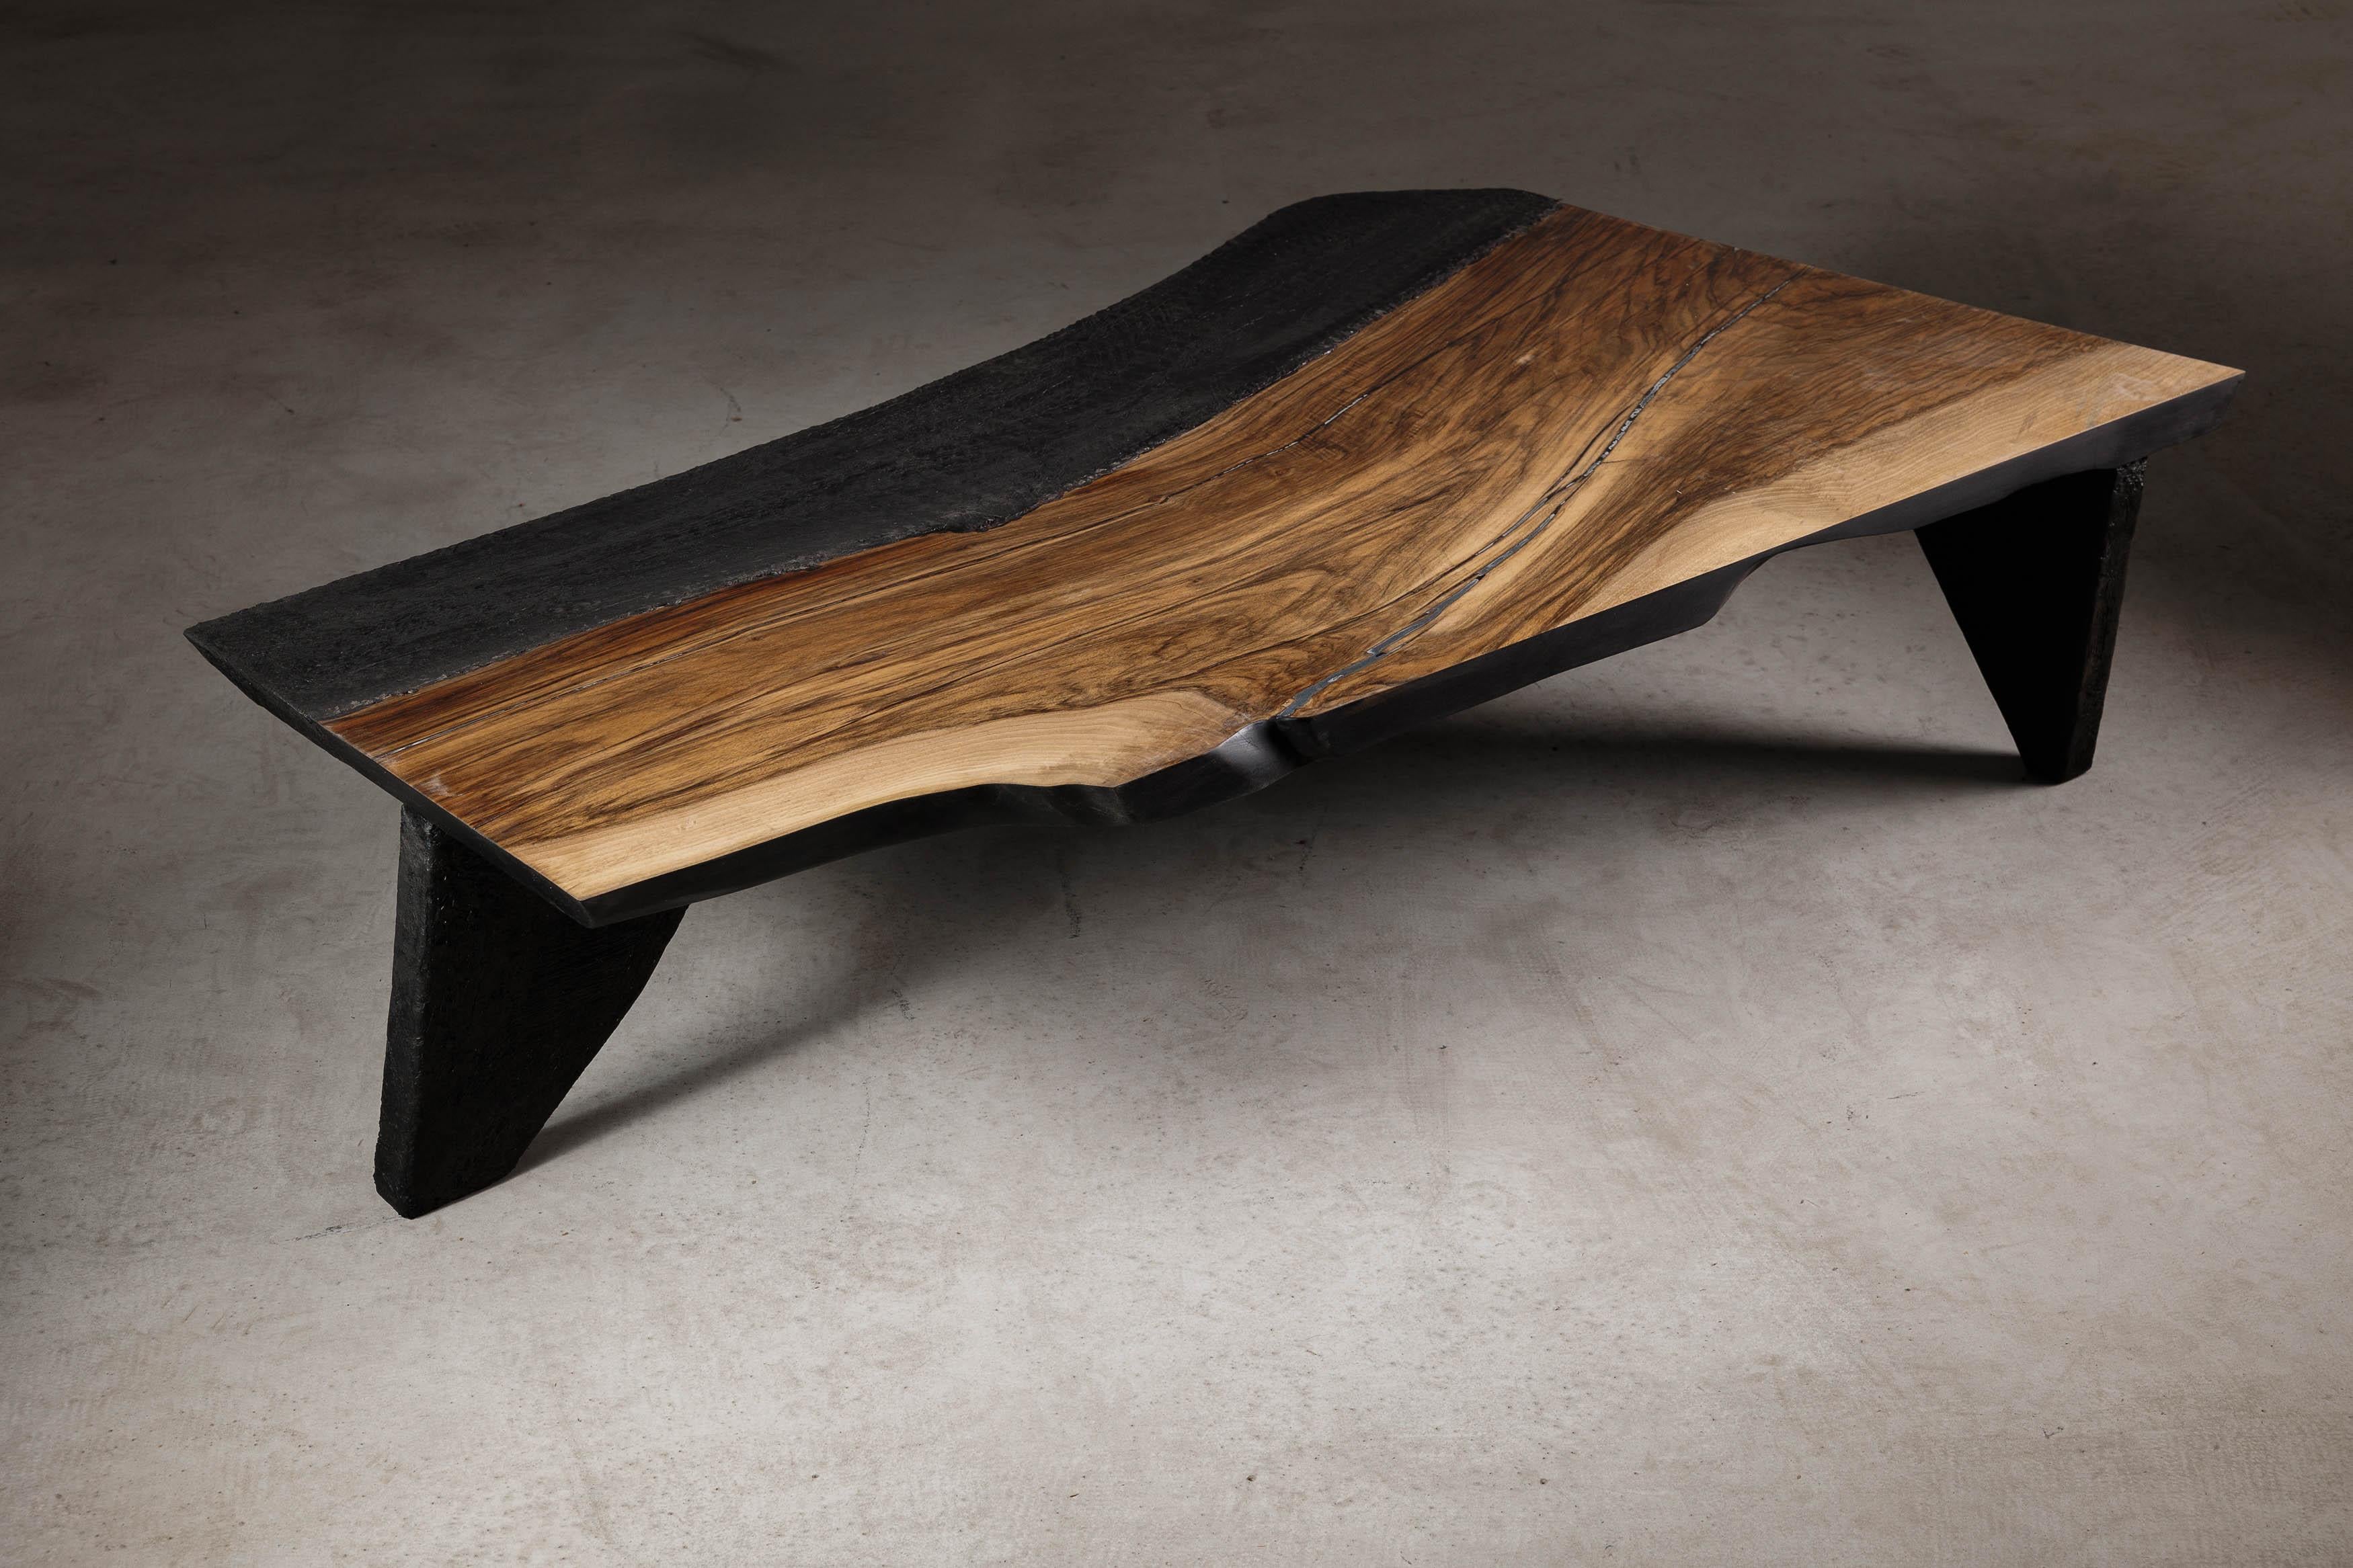 EM106 coffee table by Eero Moss
One of a kind
Dimensions; W 145 x D 87 x H 35 cm
Materials: Walnut, charred ash, fiberglass, acrylic resin, India ink.
Finish: Natural oils.

18 Brut Collection

The latest collection by the artist is a